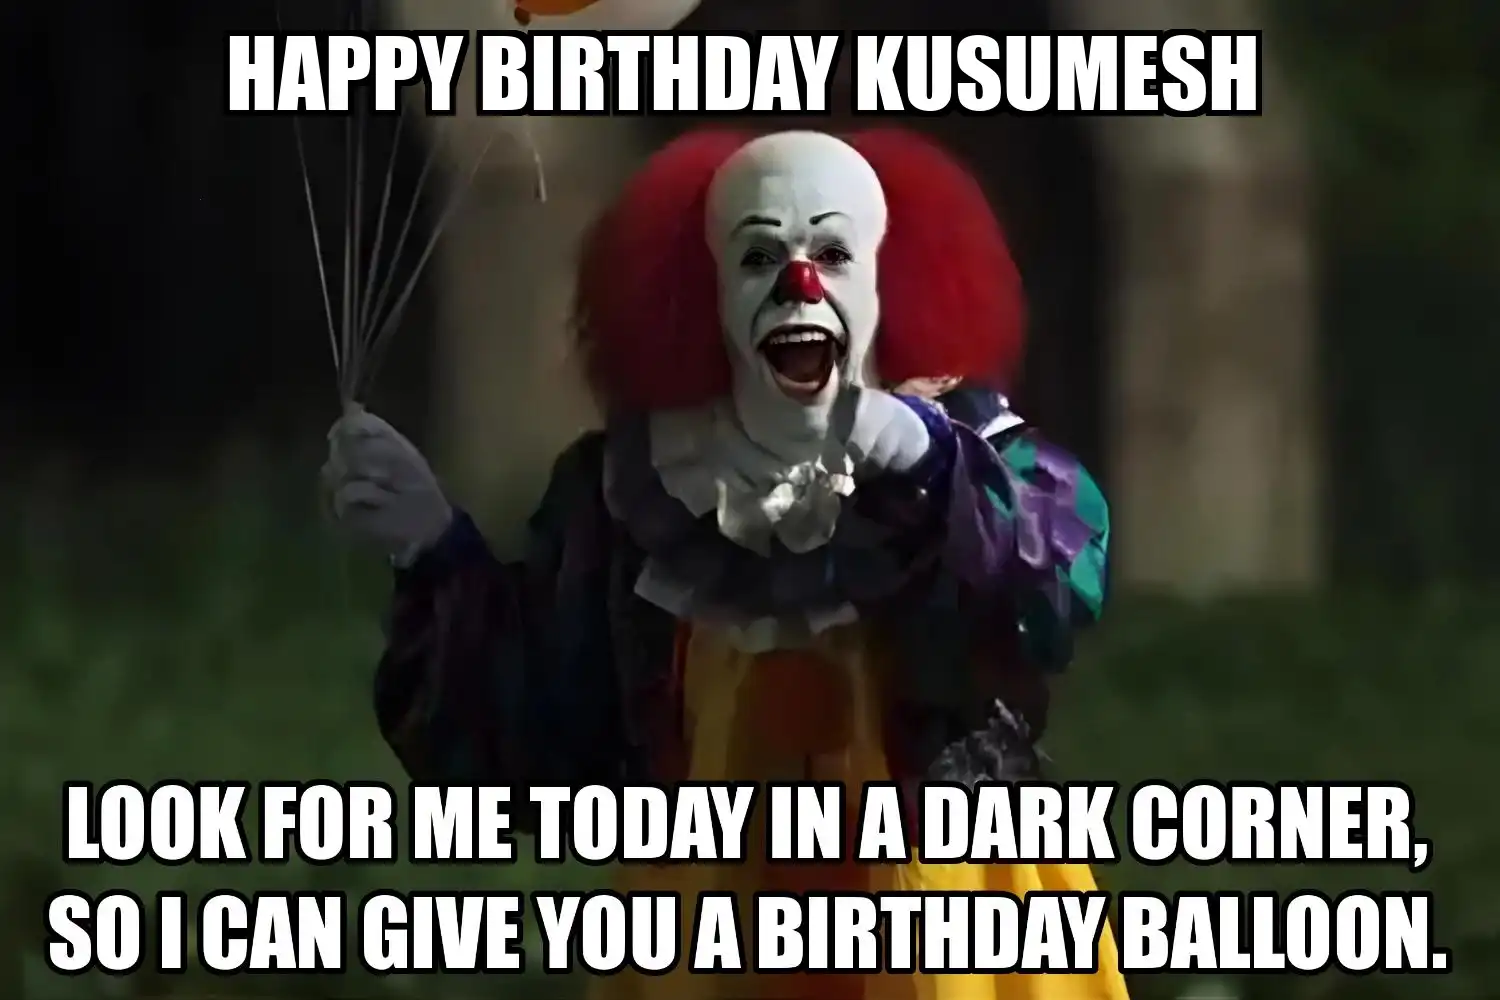 Happy Birthday Kusumesh I Can Give You A Balloon Meme